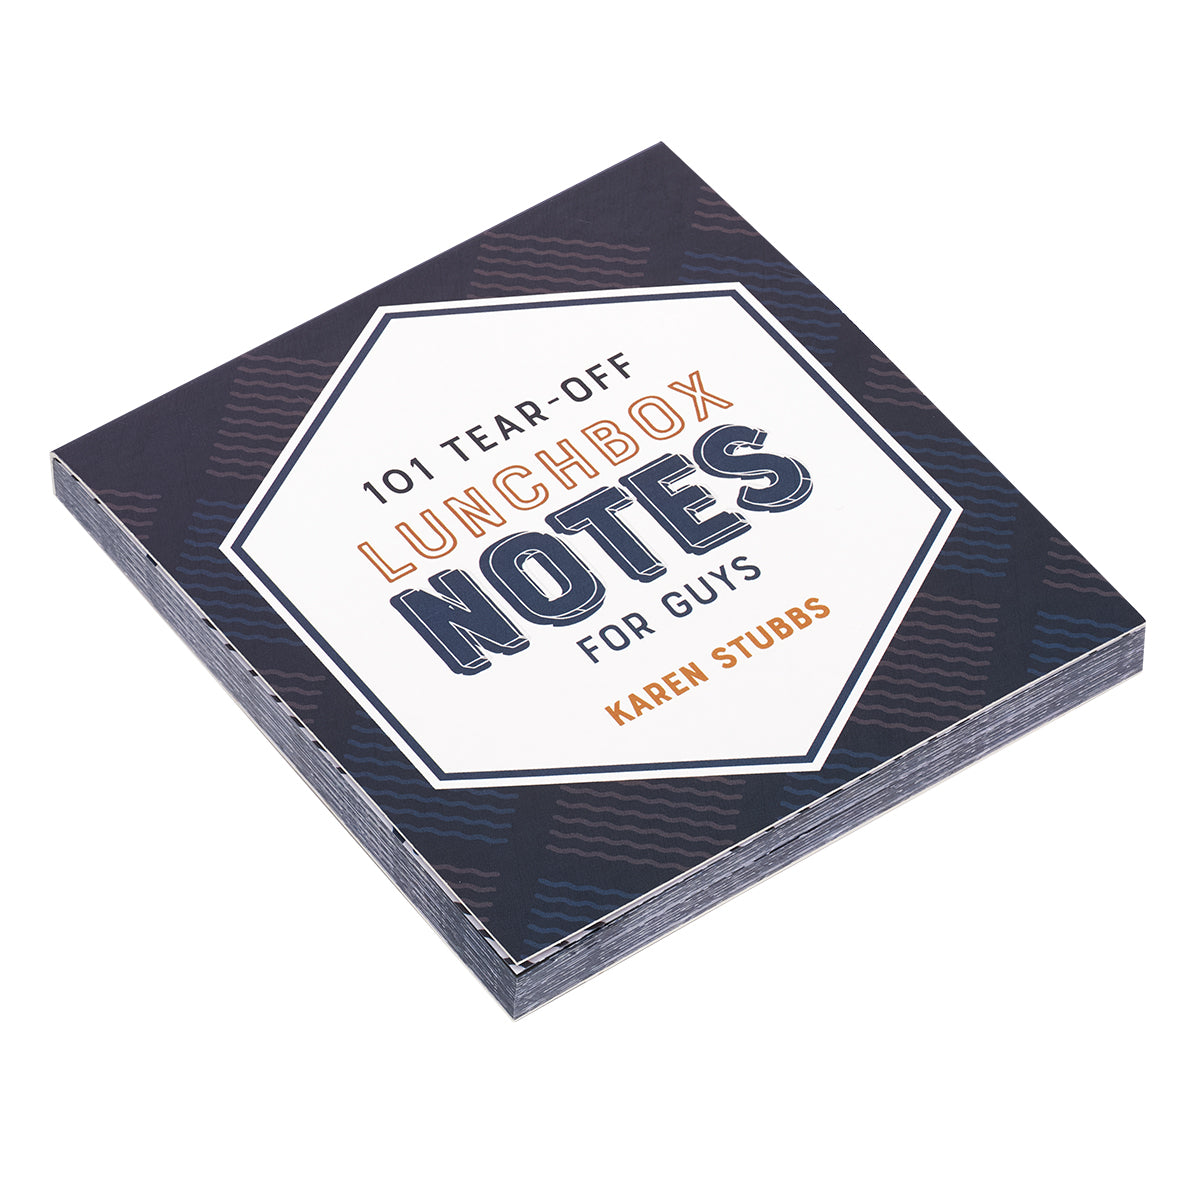 101 Lunchbox Notes For Guys - The Christian Gift Company